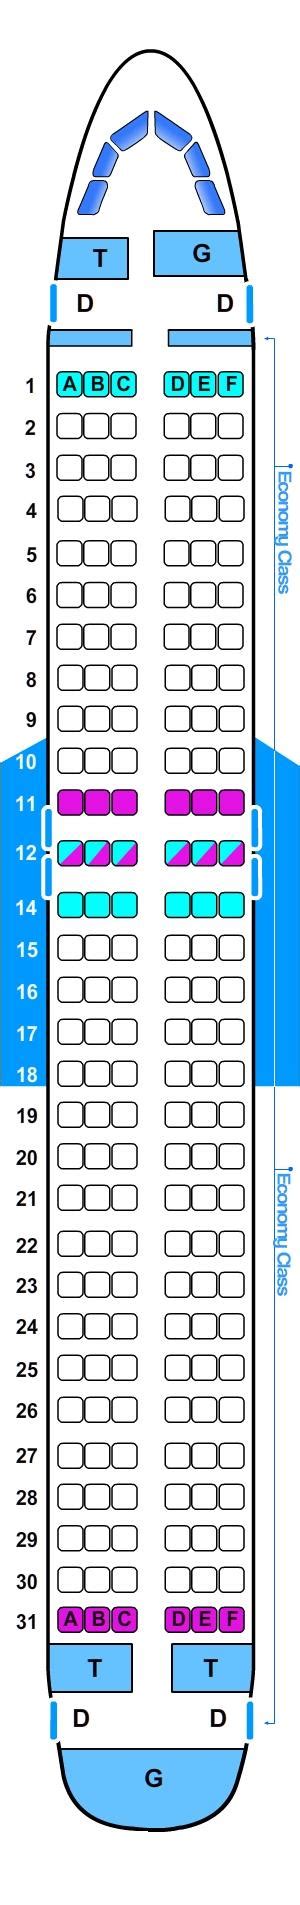 Seat Map Airbus A320 200 Neo Qatar Airways Best Seats In The Plane